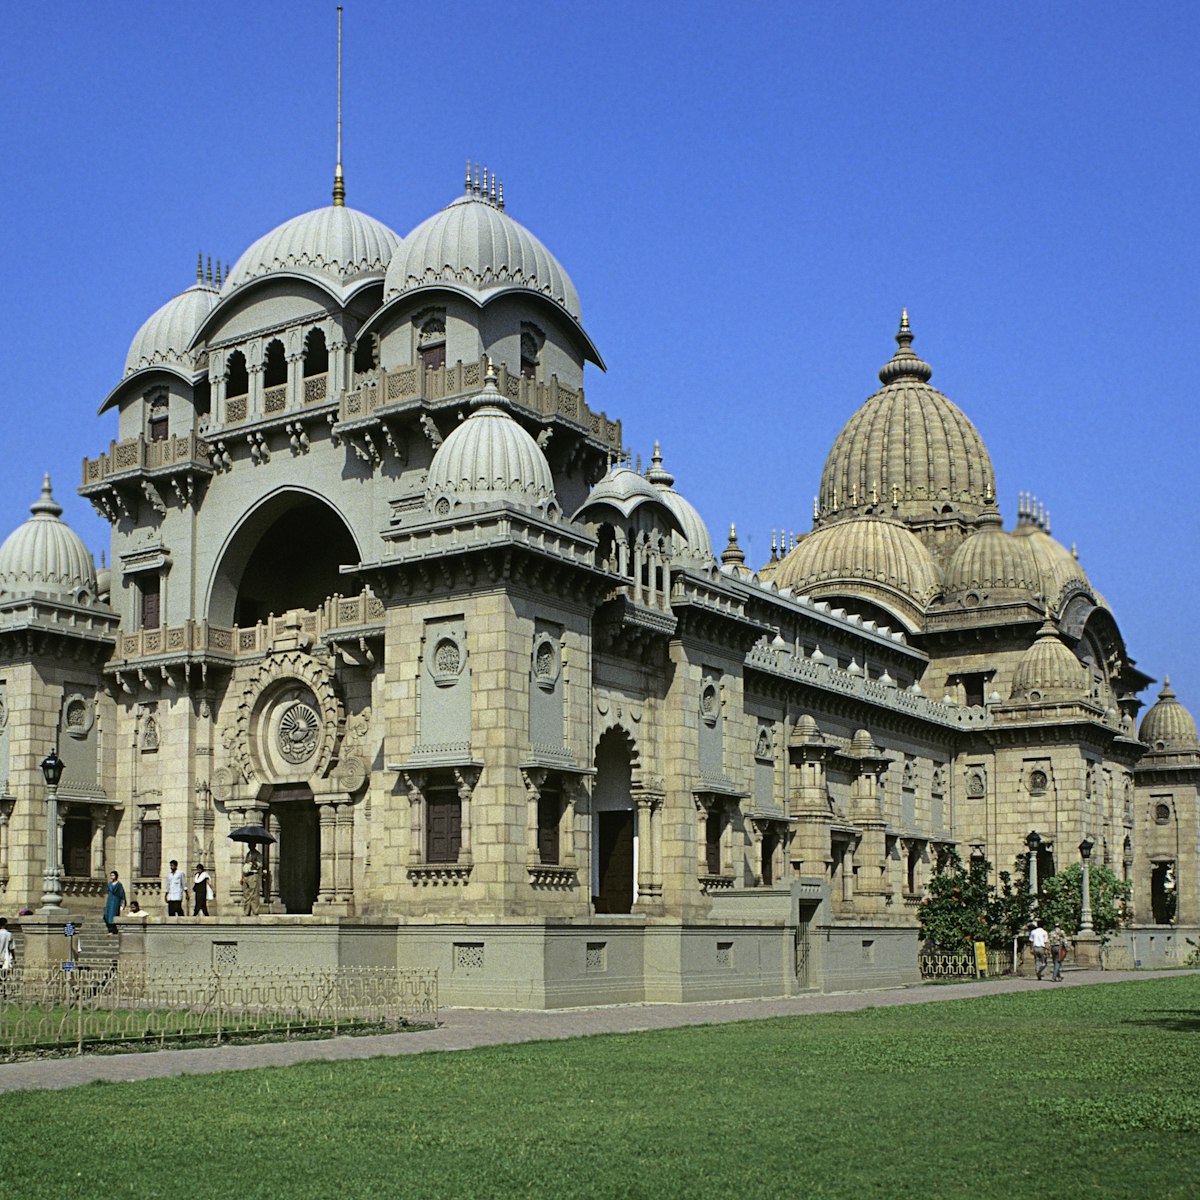 Belur Math in Calcutta, West Bengal, India. (Photo by: IndiaPictures/UIG via Getty Images)